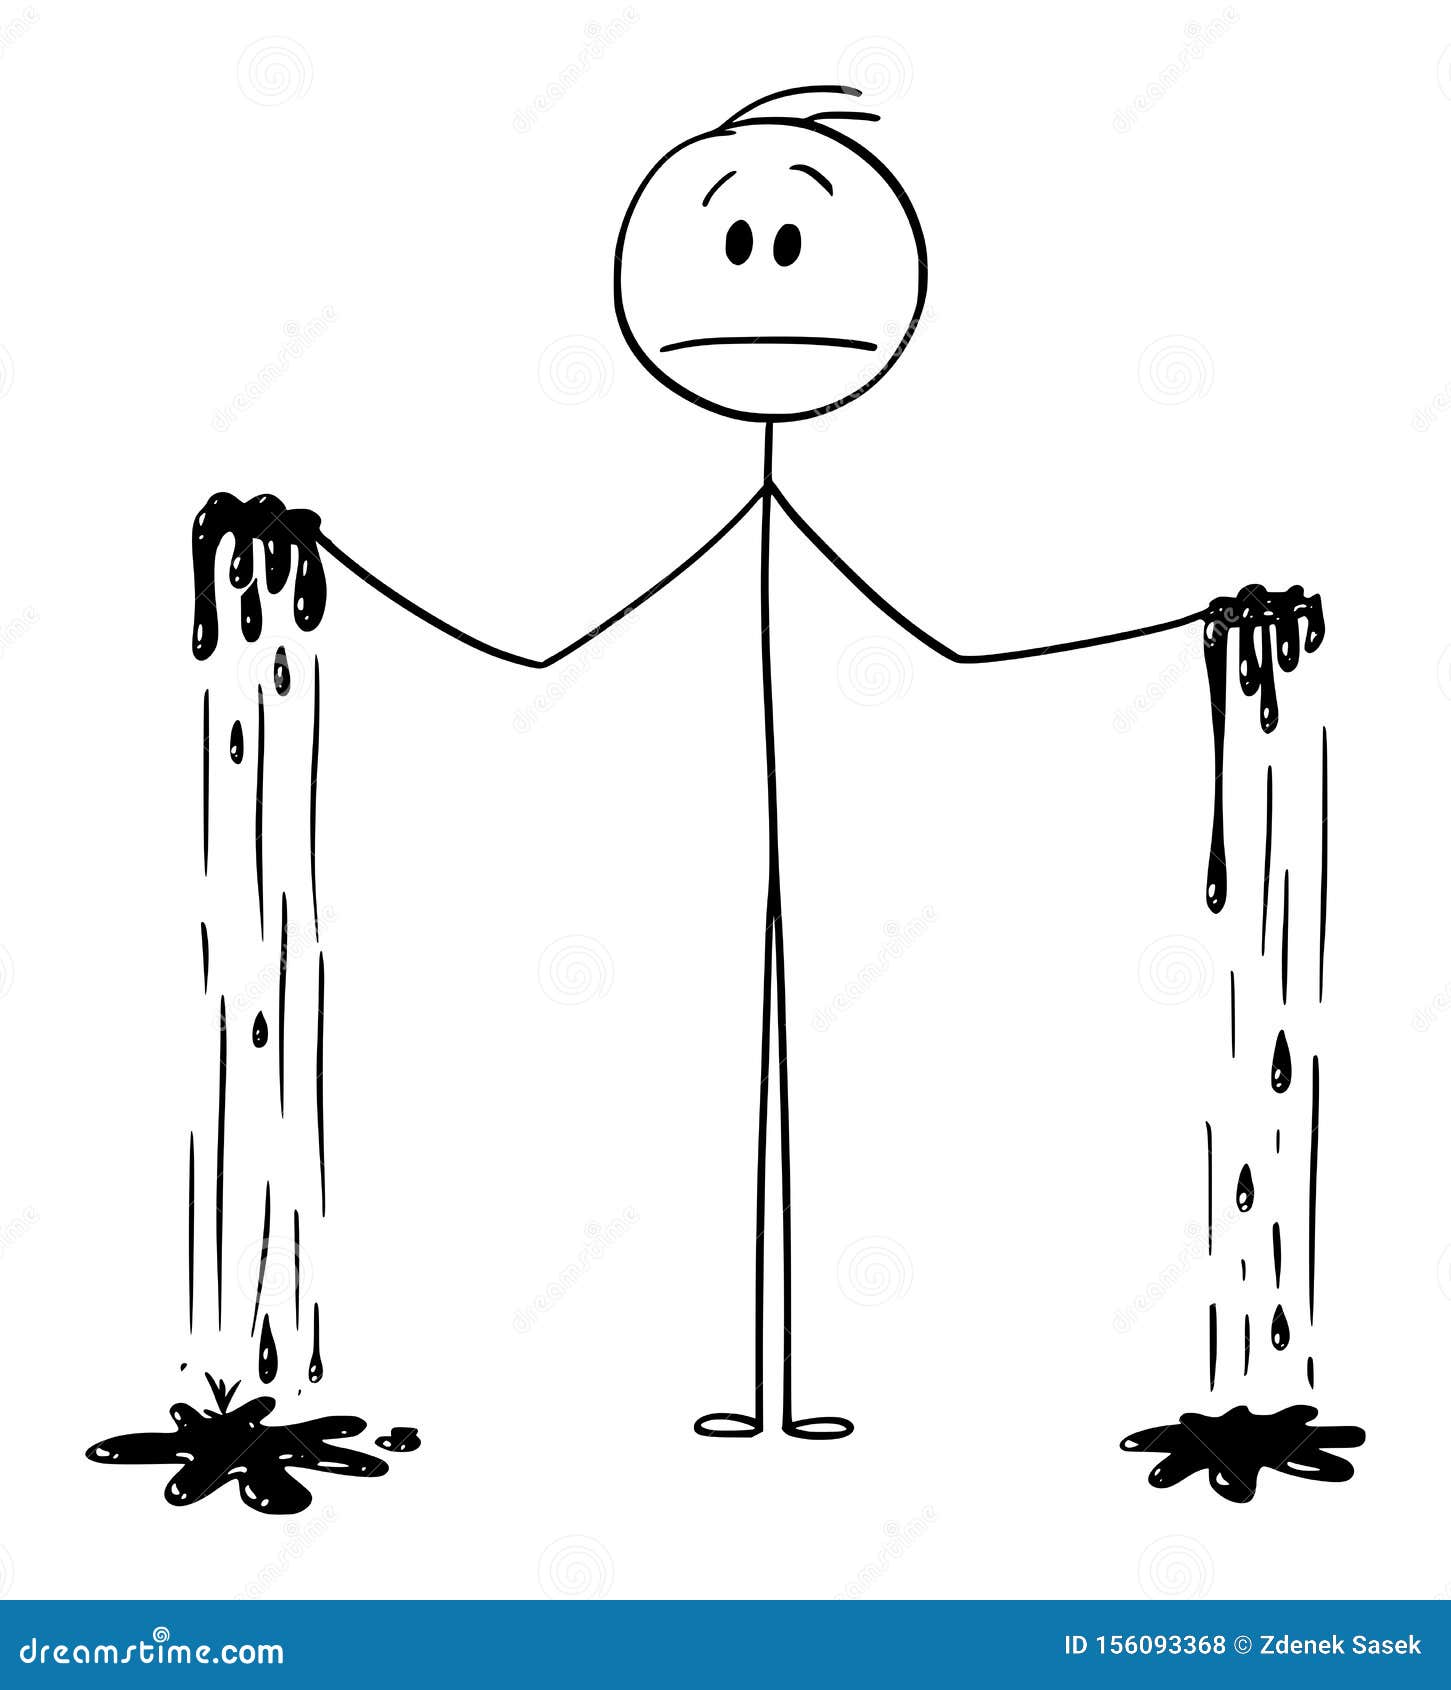  cartoon of man with both hands dirty or grimy or blood on hands